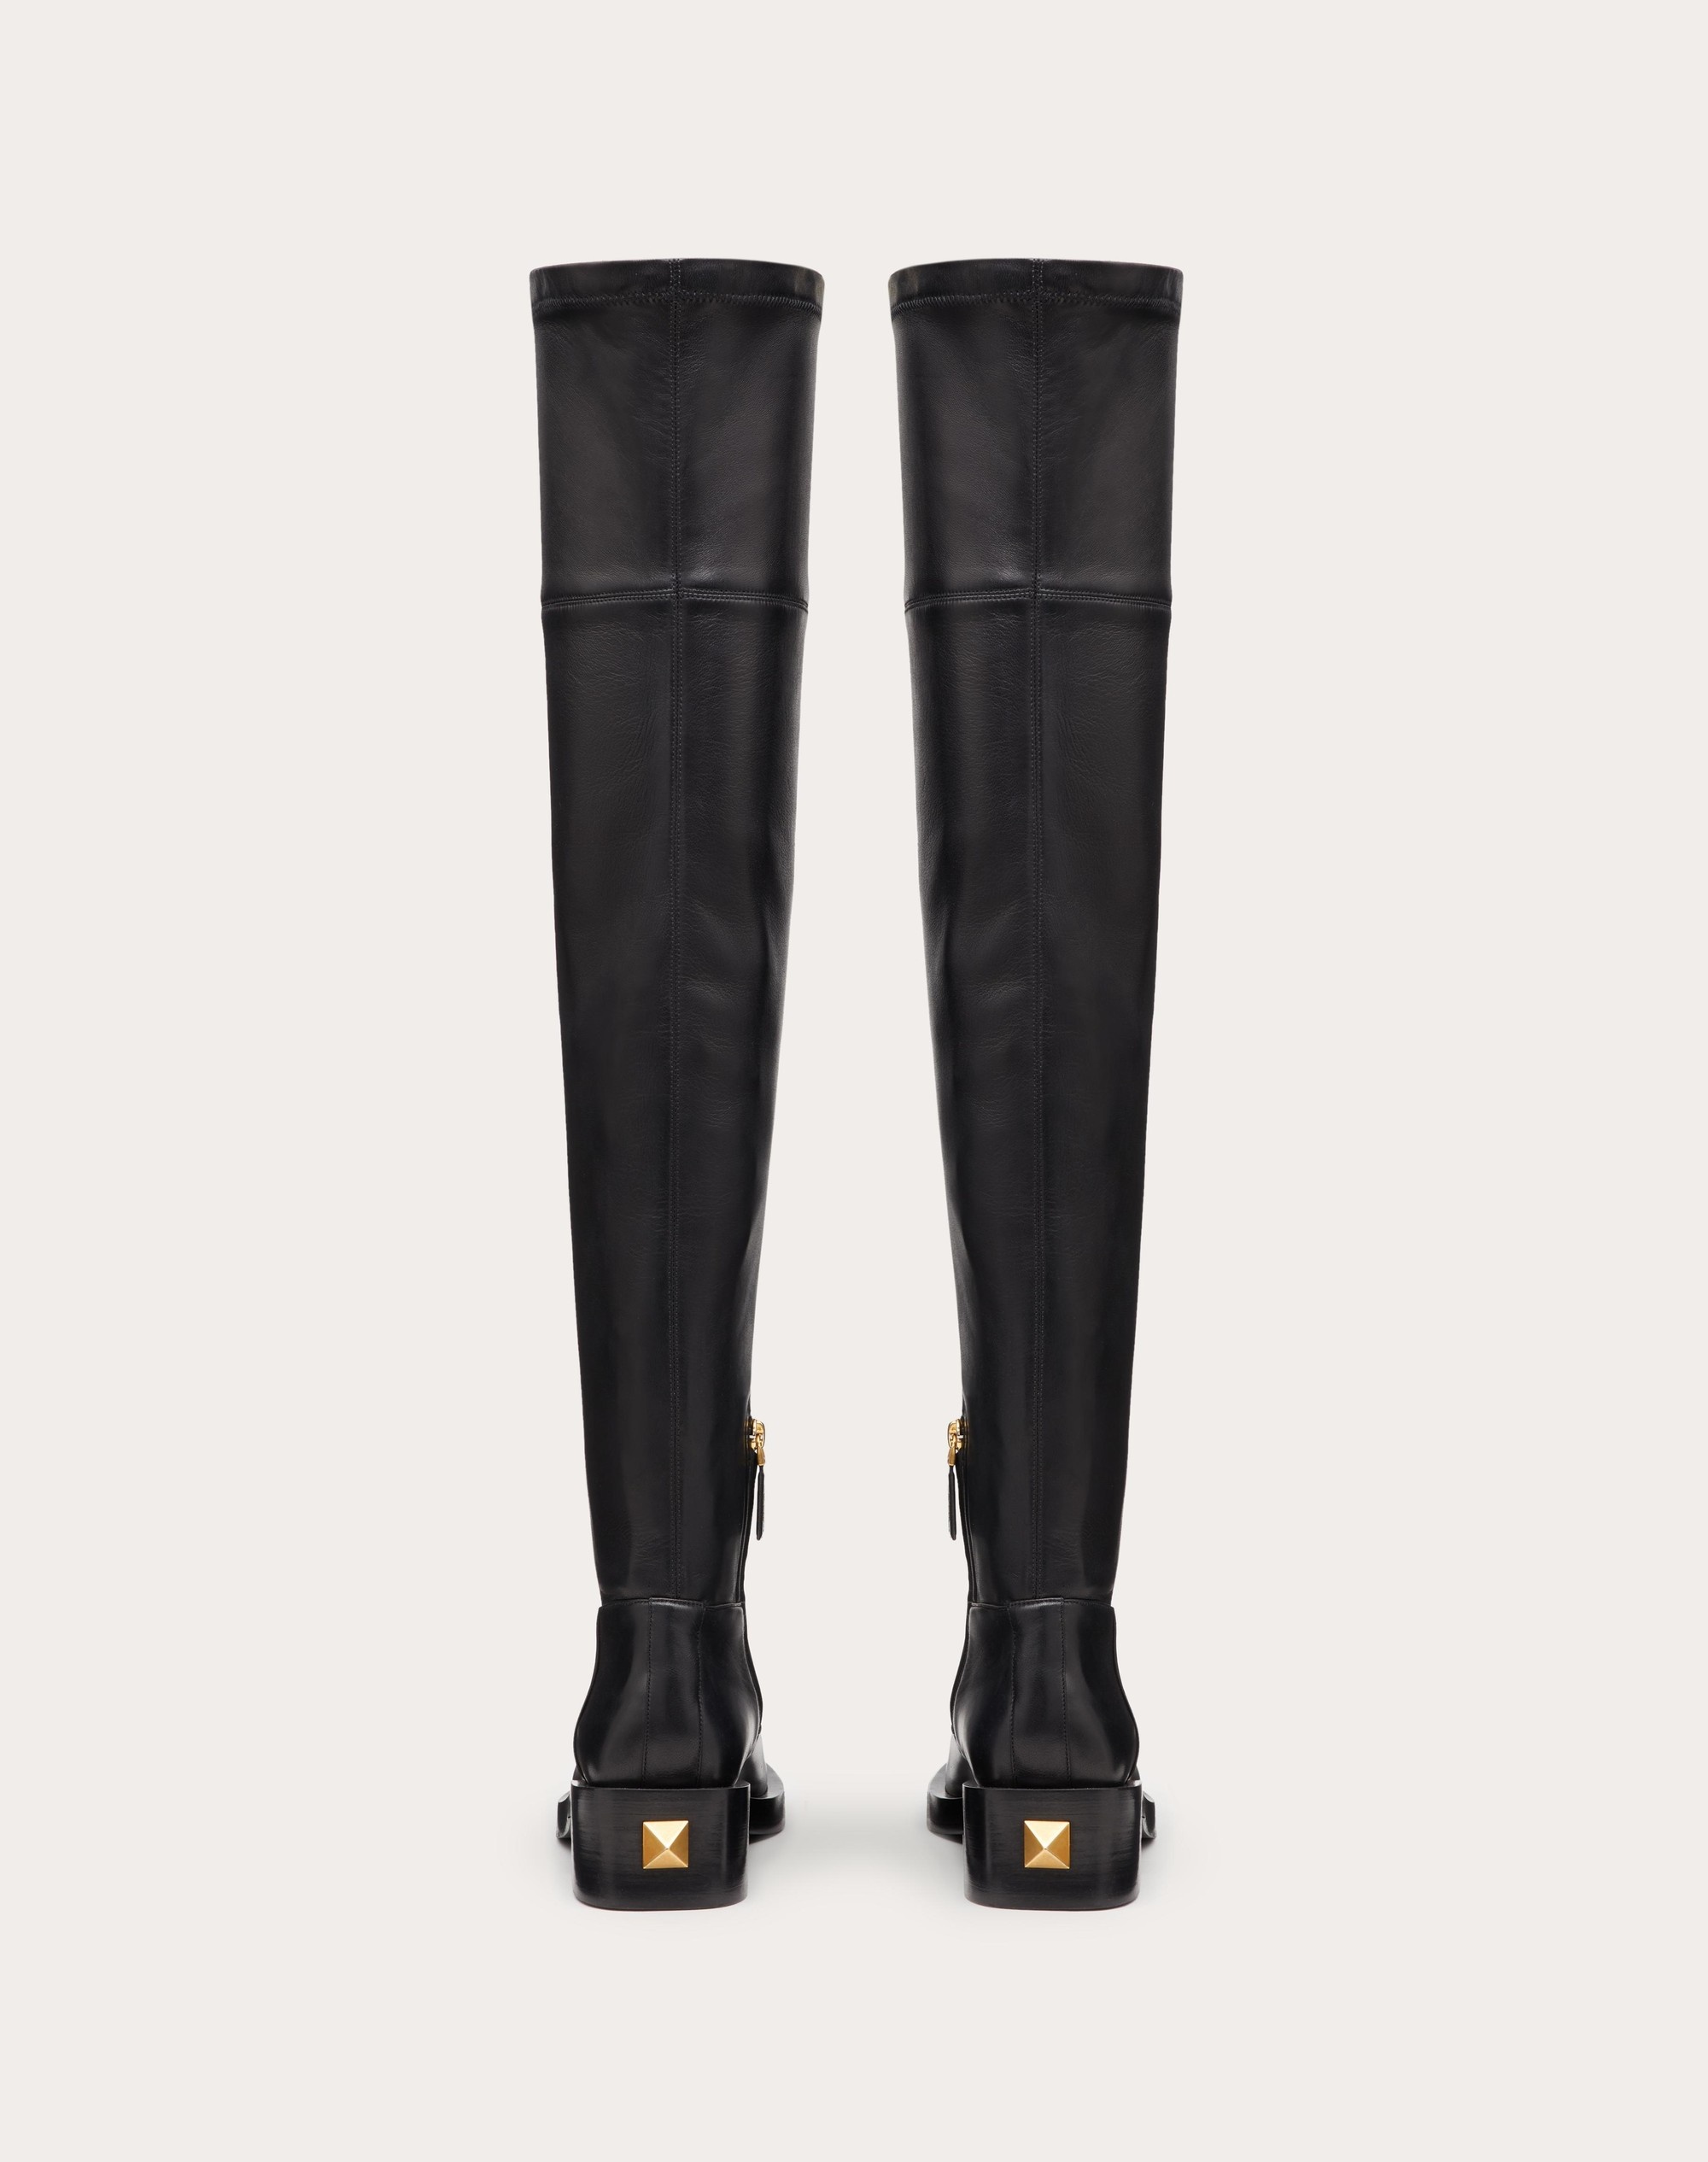 ROMAN STUD STRETCH NAPPA OVER-THE-KNEE BOOT 30MM - 3